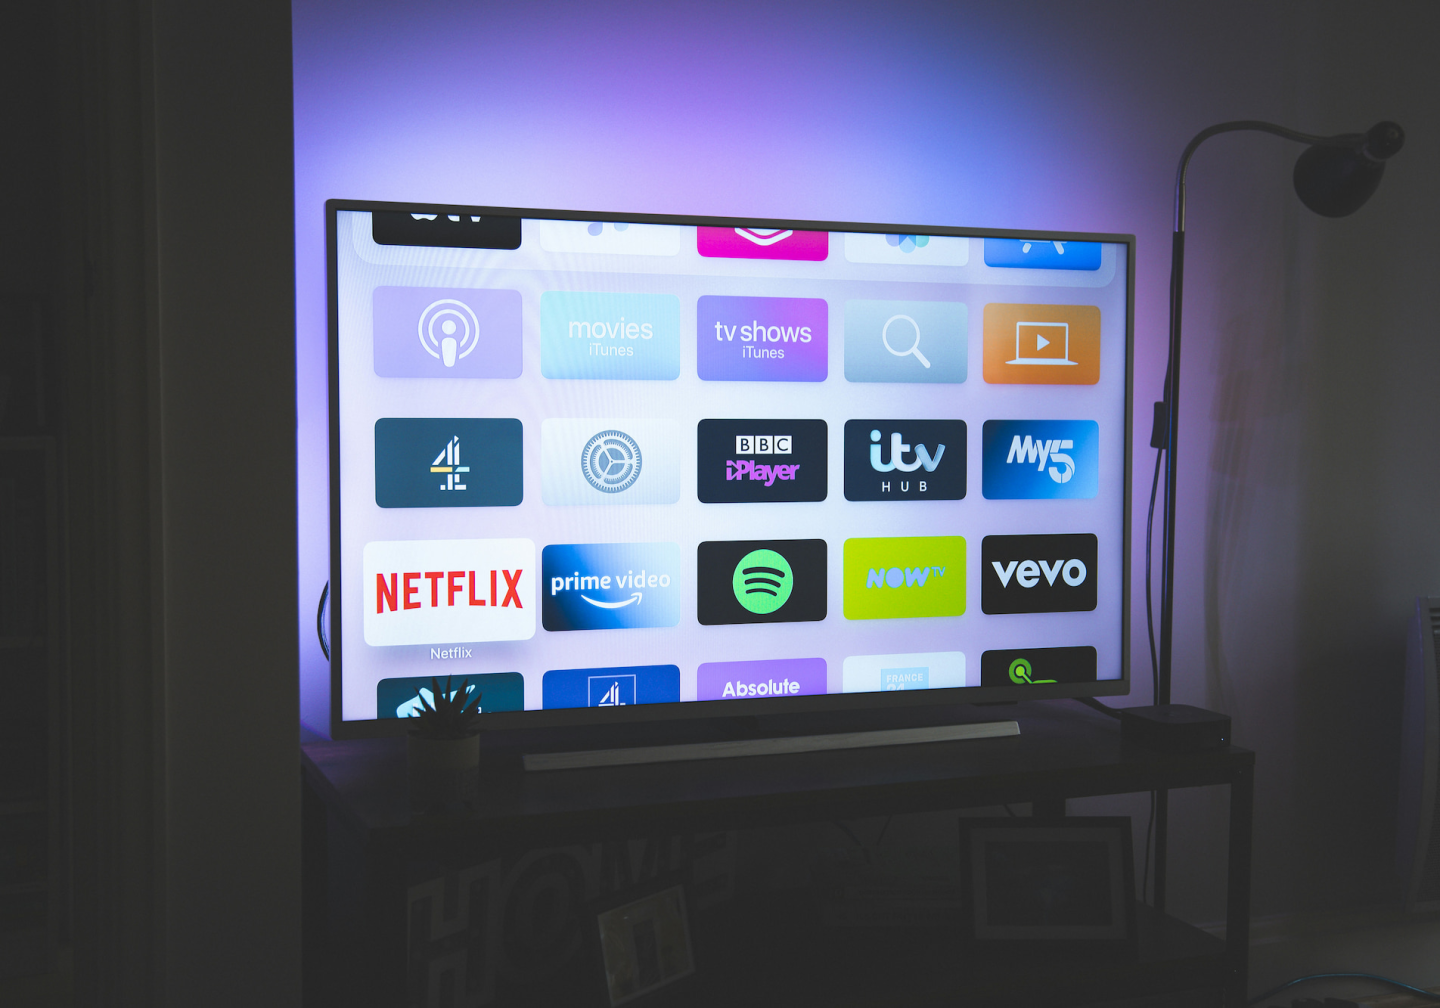 Connected TV showing UK applications and streaming services